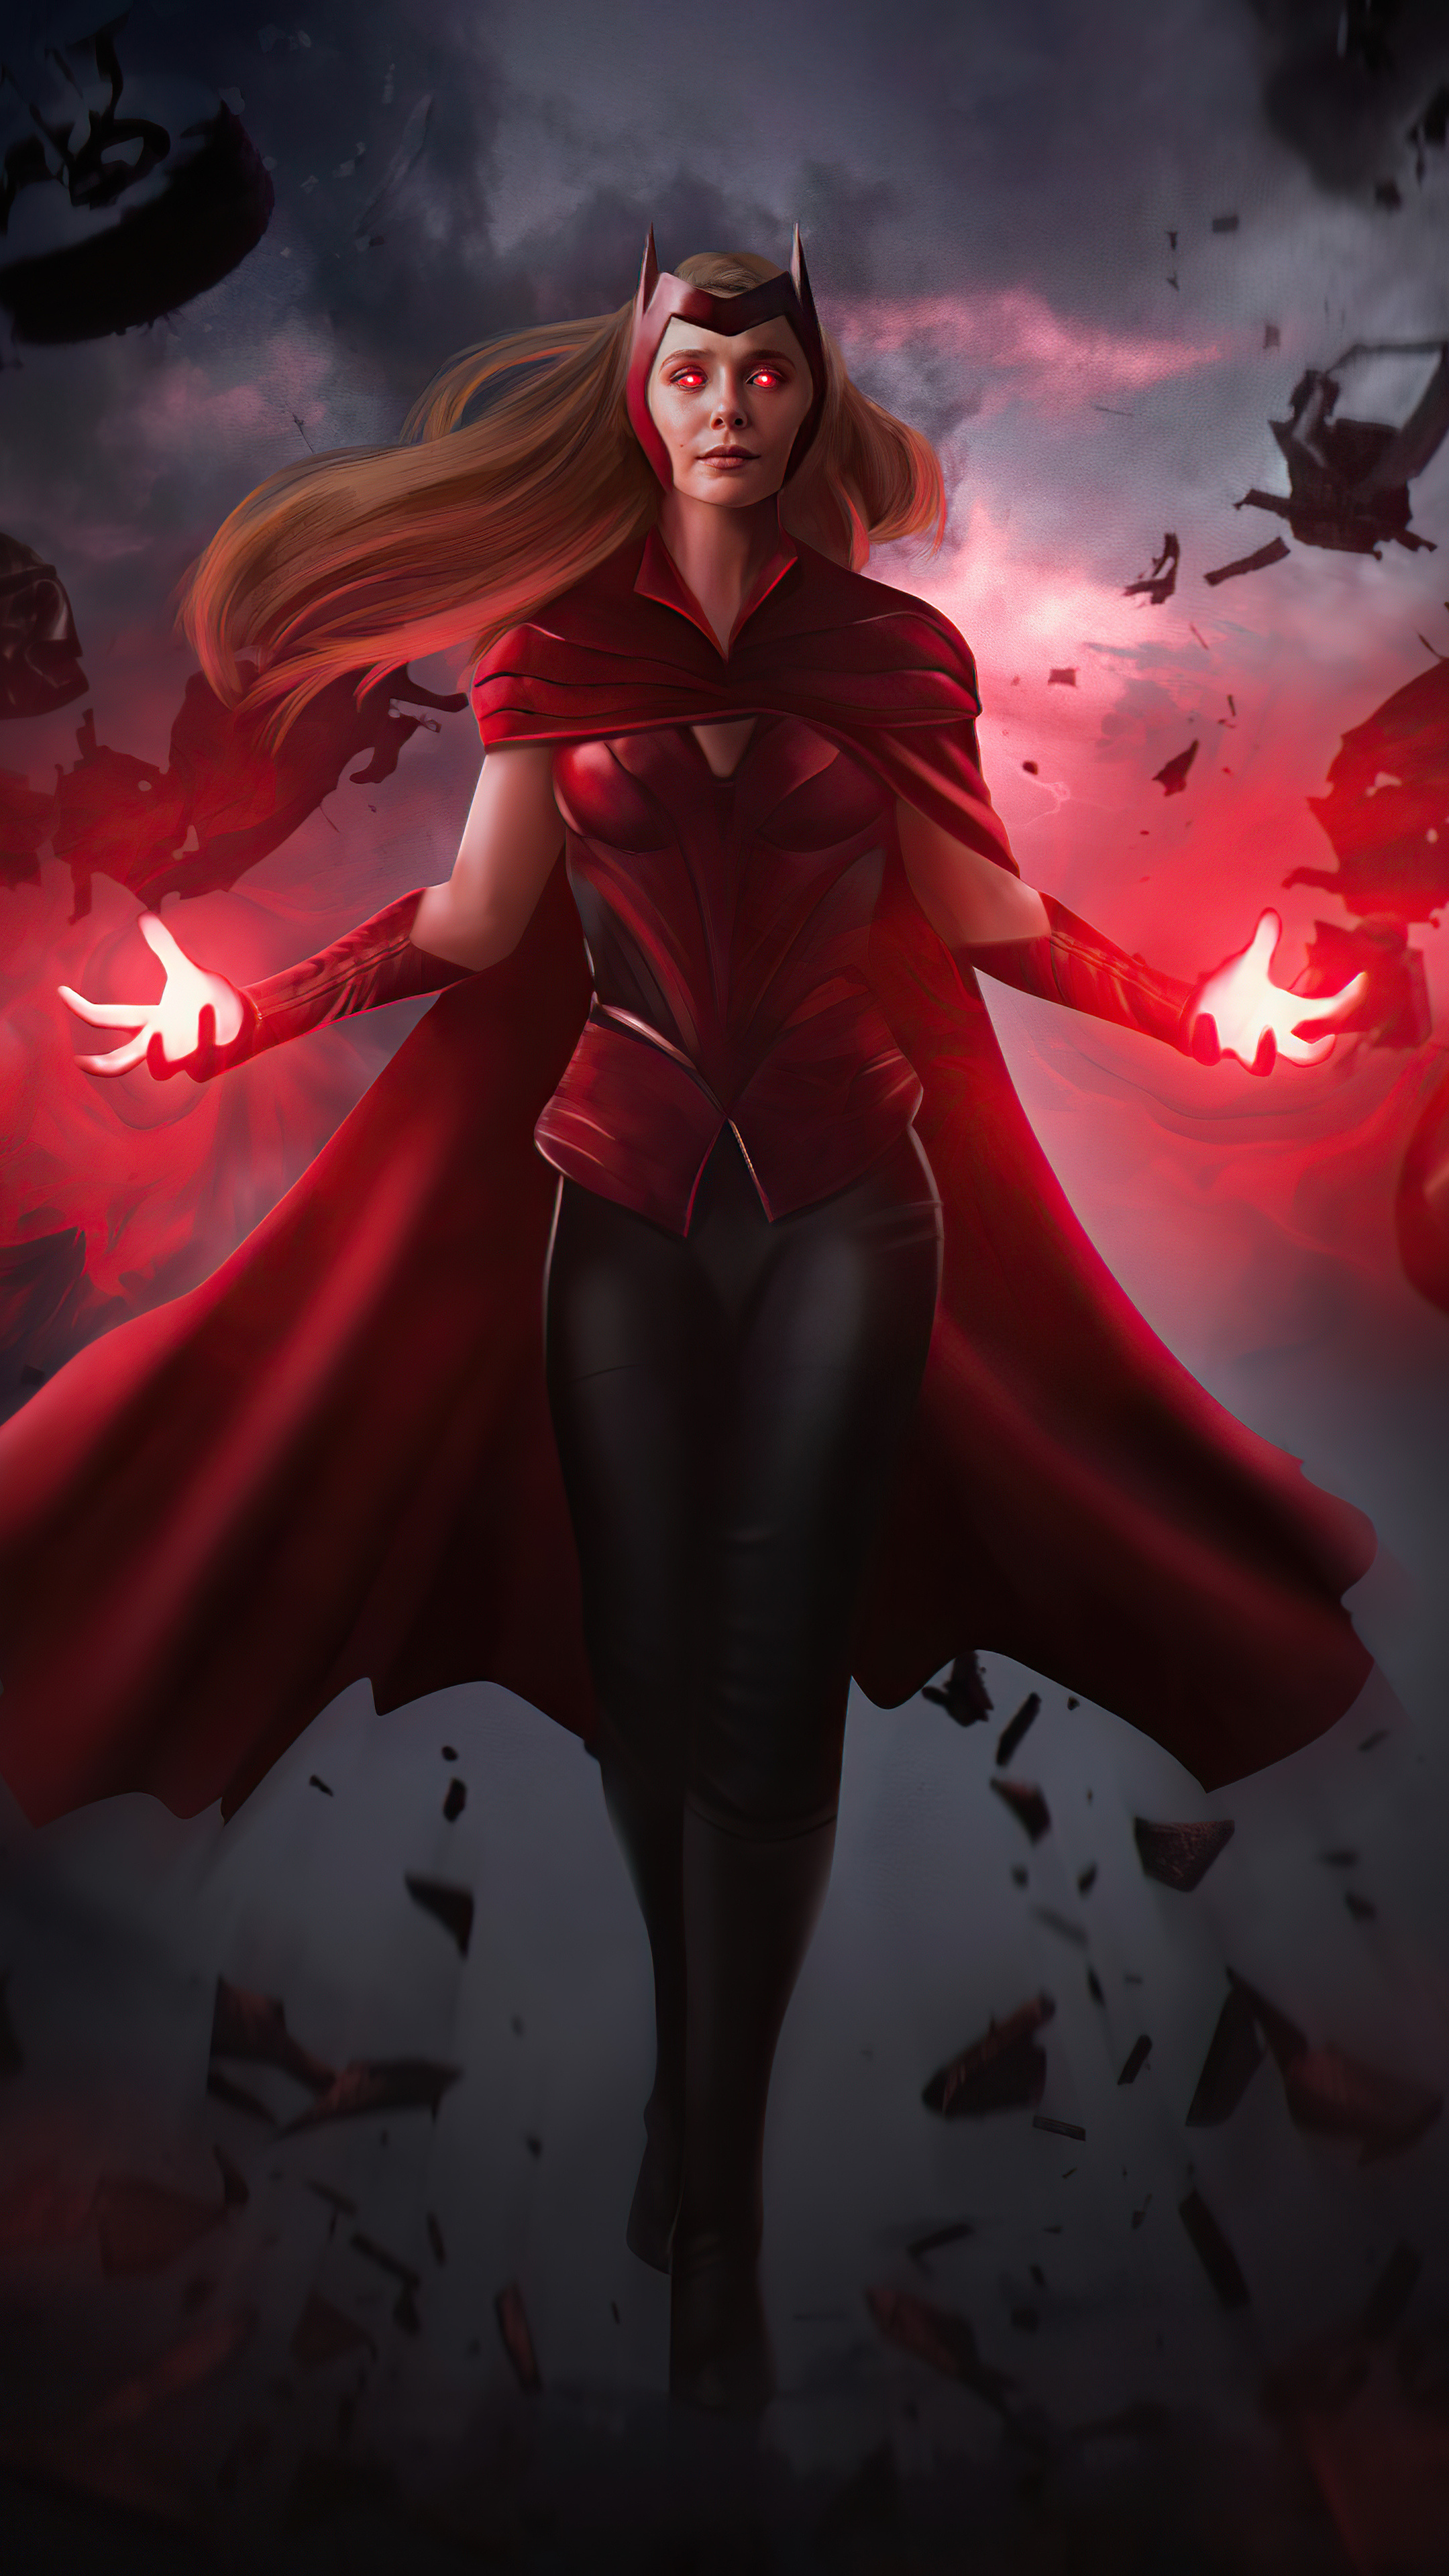 Scarlet Witch, Wanda Vision, Sony Xperia, 4K wallpapers, 2160x3840 4K Phone